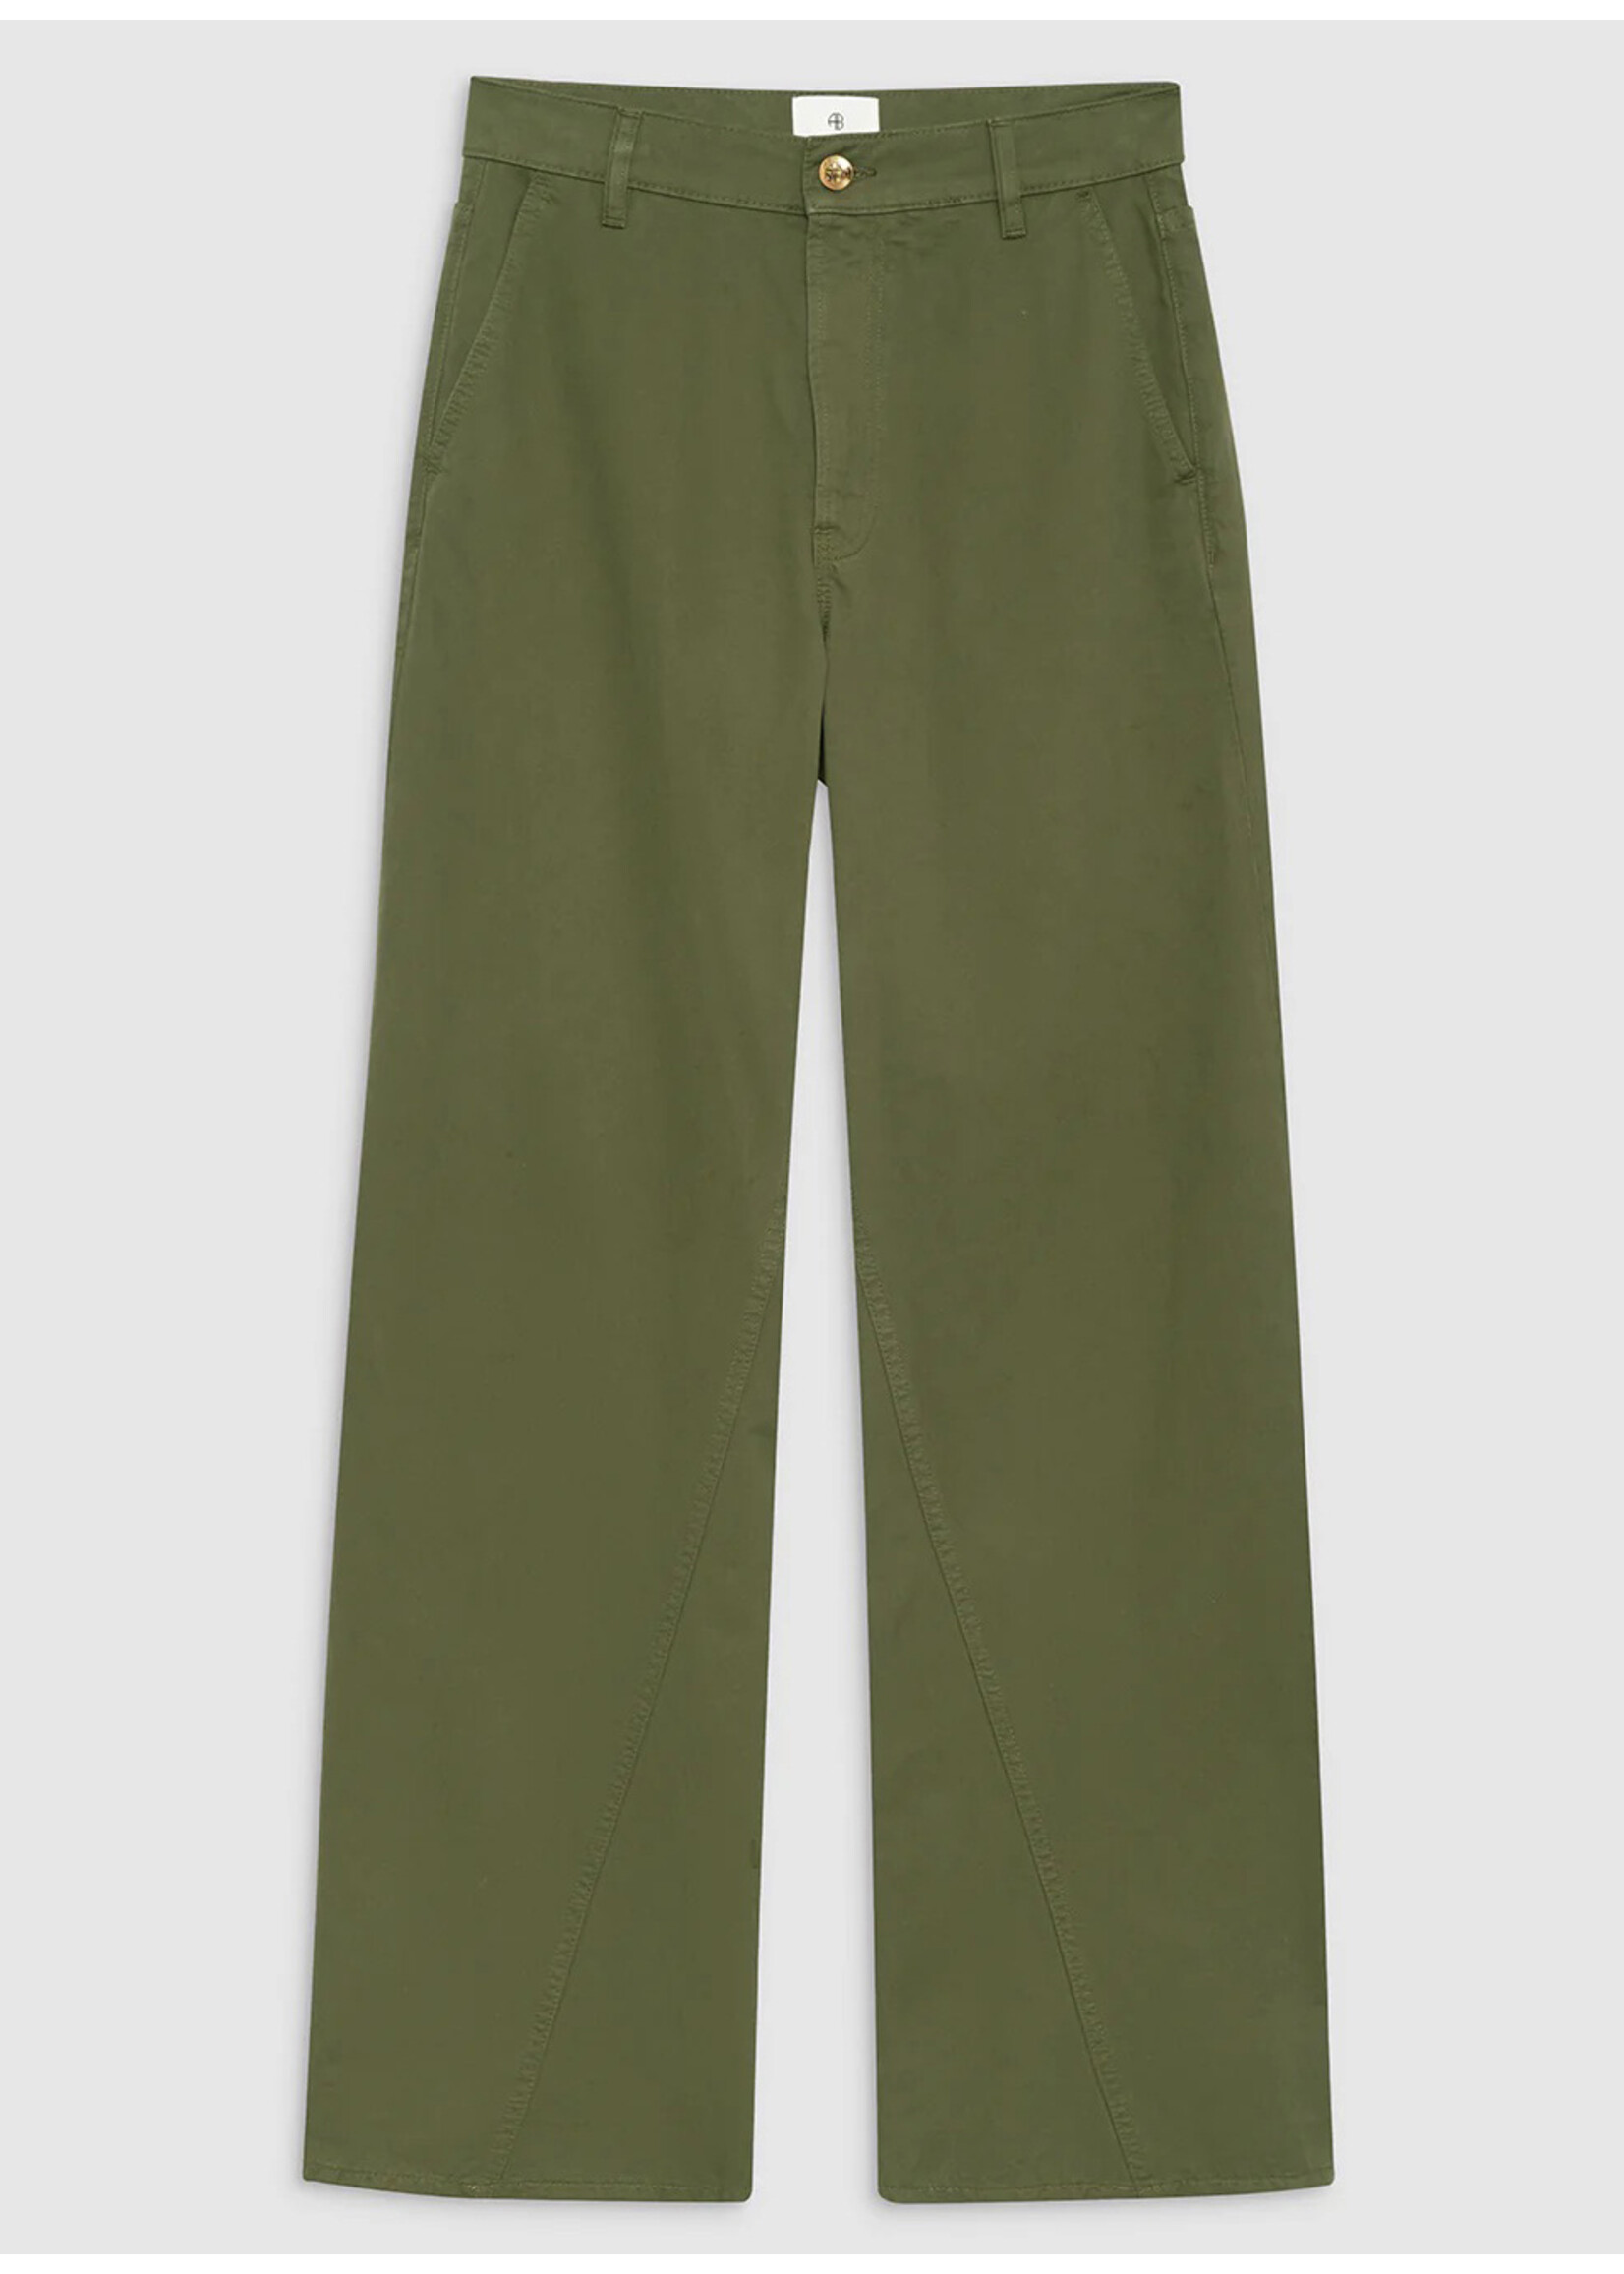 Anine Bing Briley Pant Army Green